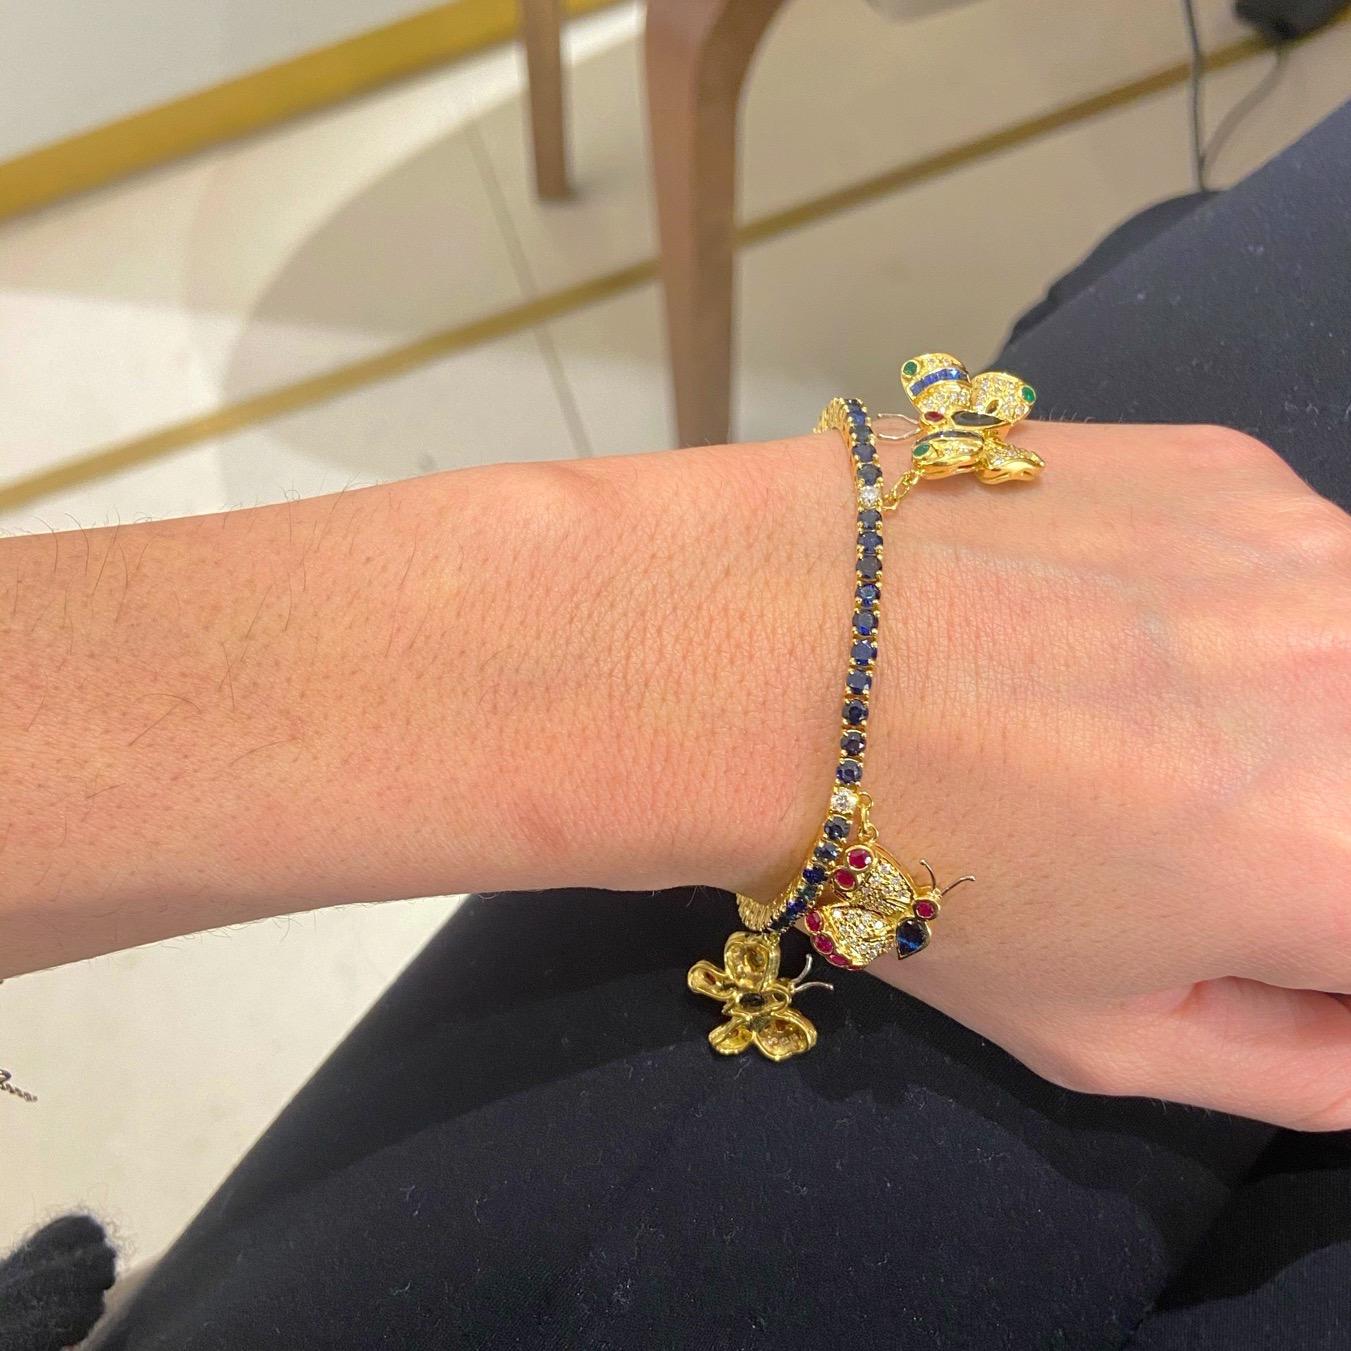 Sabbadini 18KT YG Butterfly Charm Bracelet with Diamonds, Sapphire, Ruby, Emerald In New Condition For Sale In New York, NY